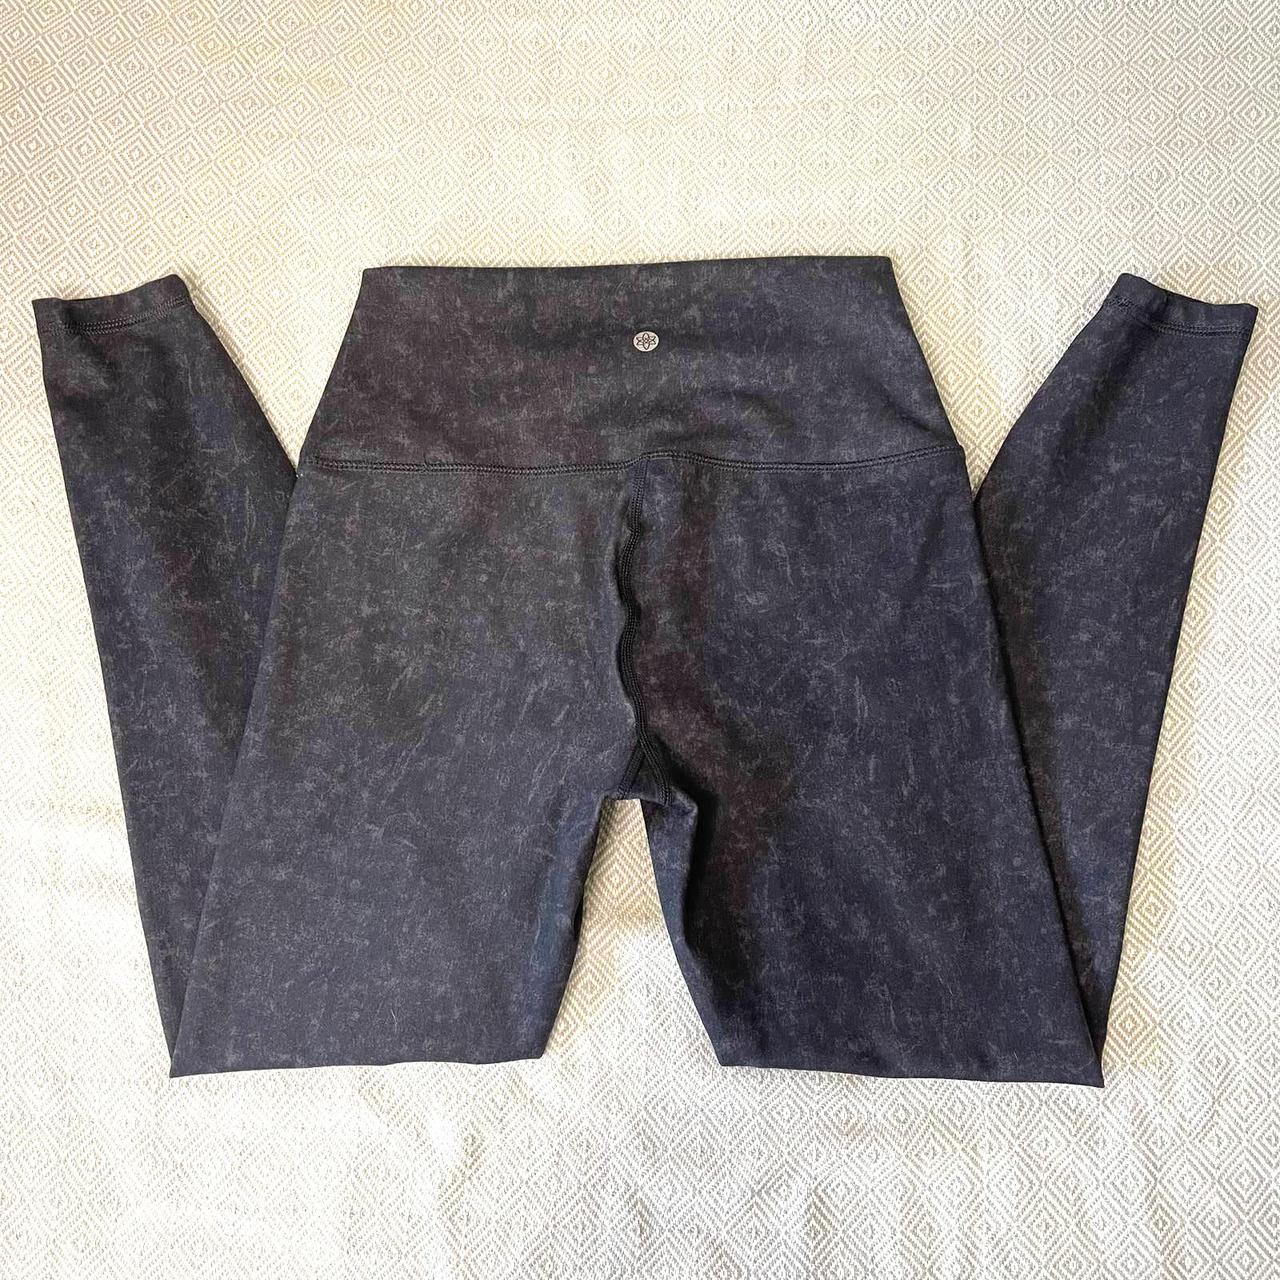 Full length Gaiam leggings with pockets - Size XS - Depop